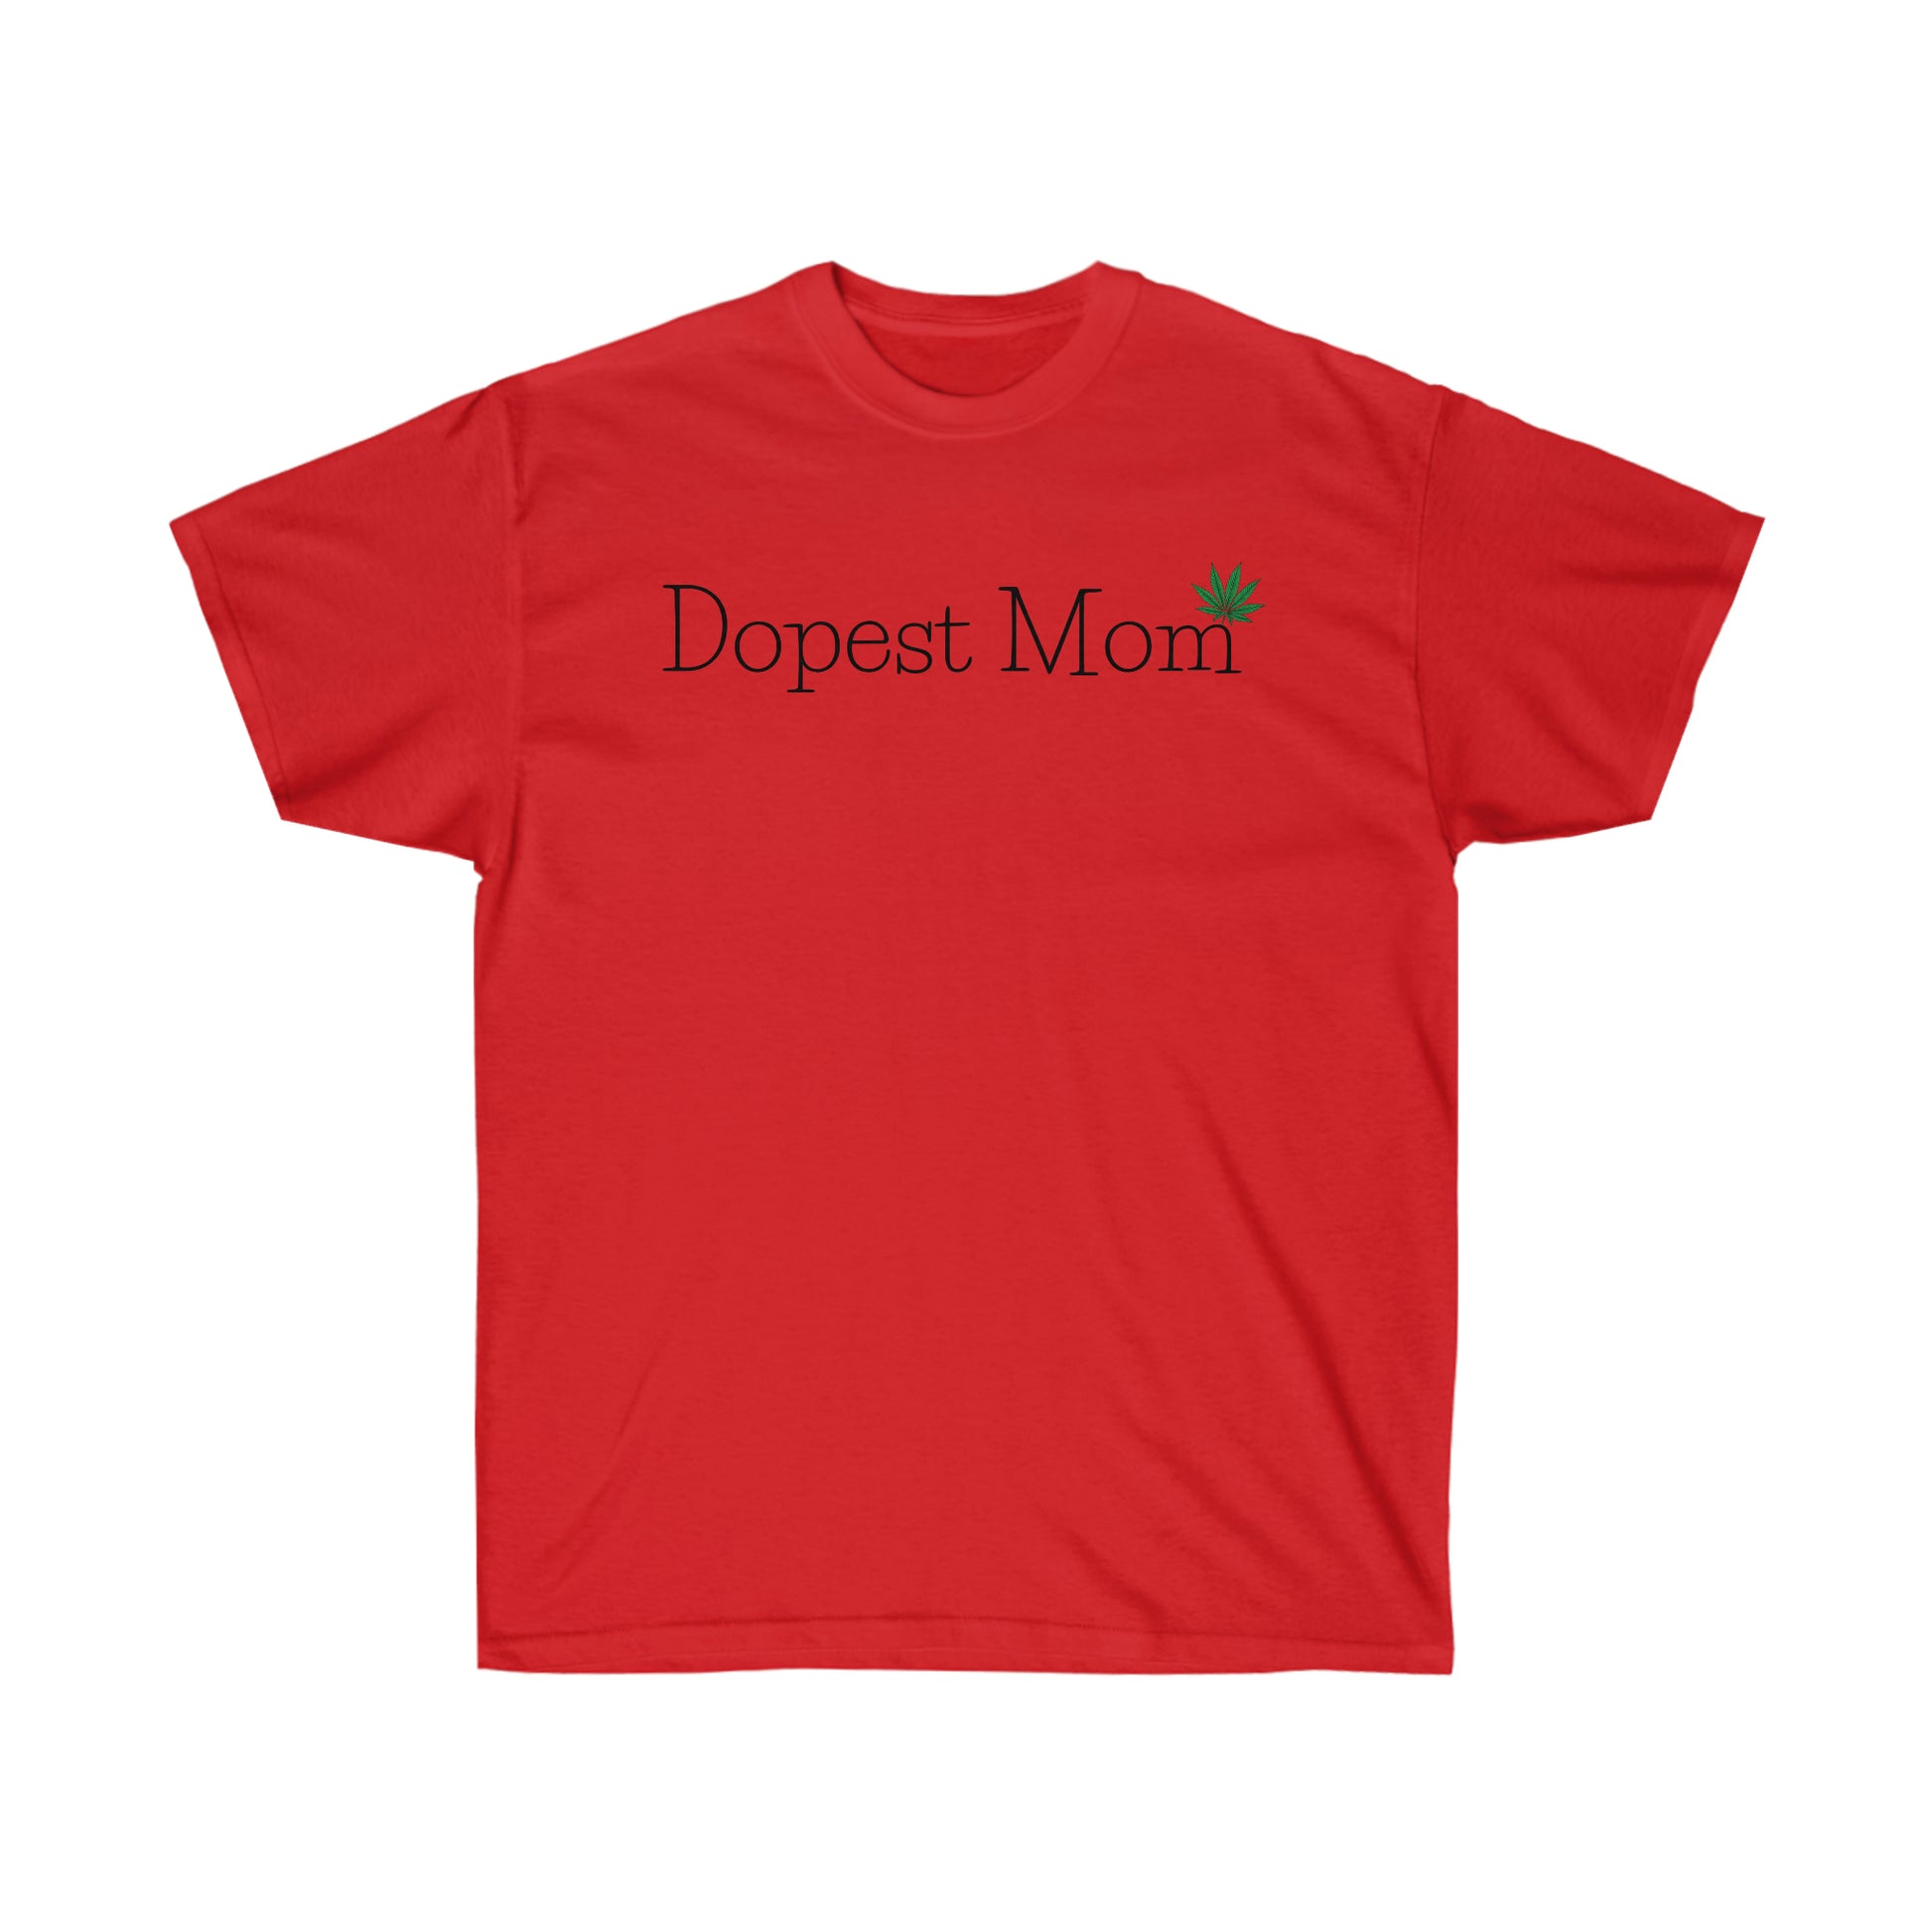 A red Dopest Mom Weed T-Shirt with the word 'deposit mom' on it.